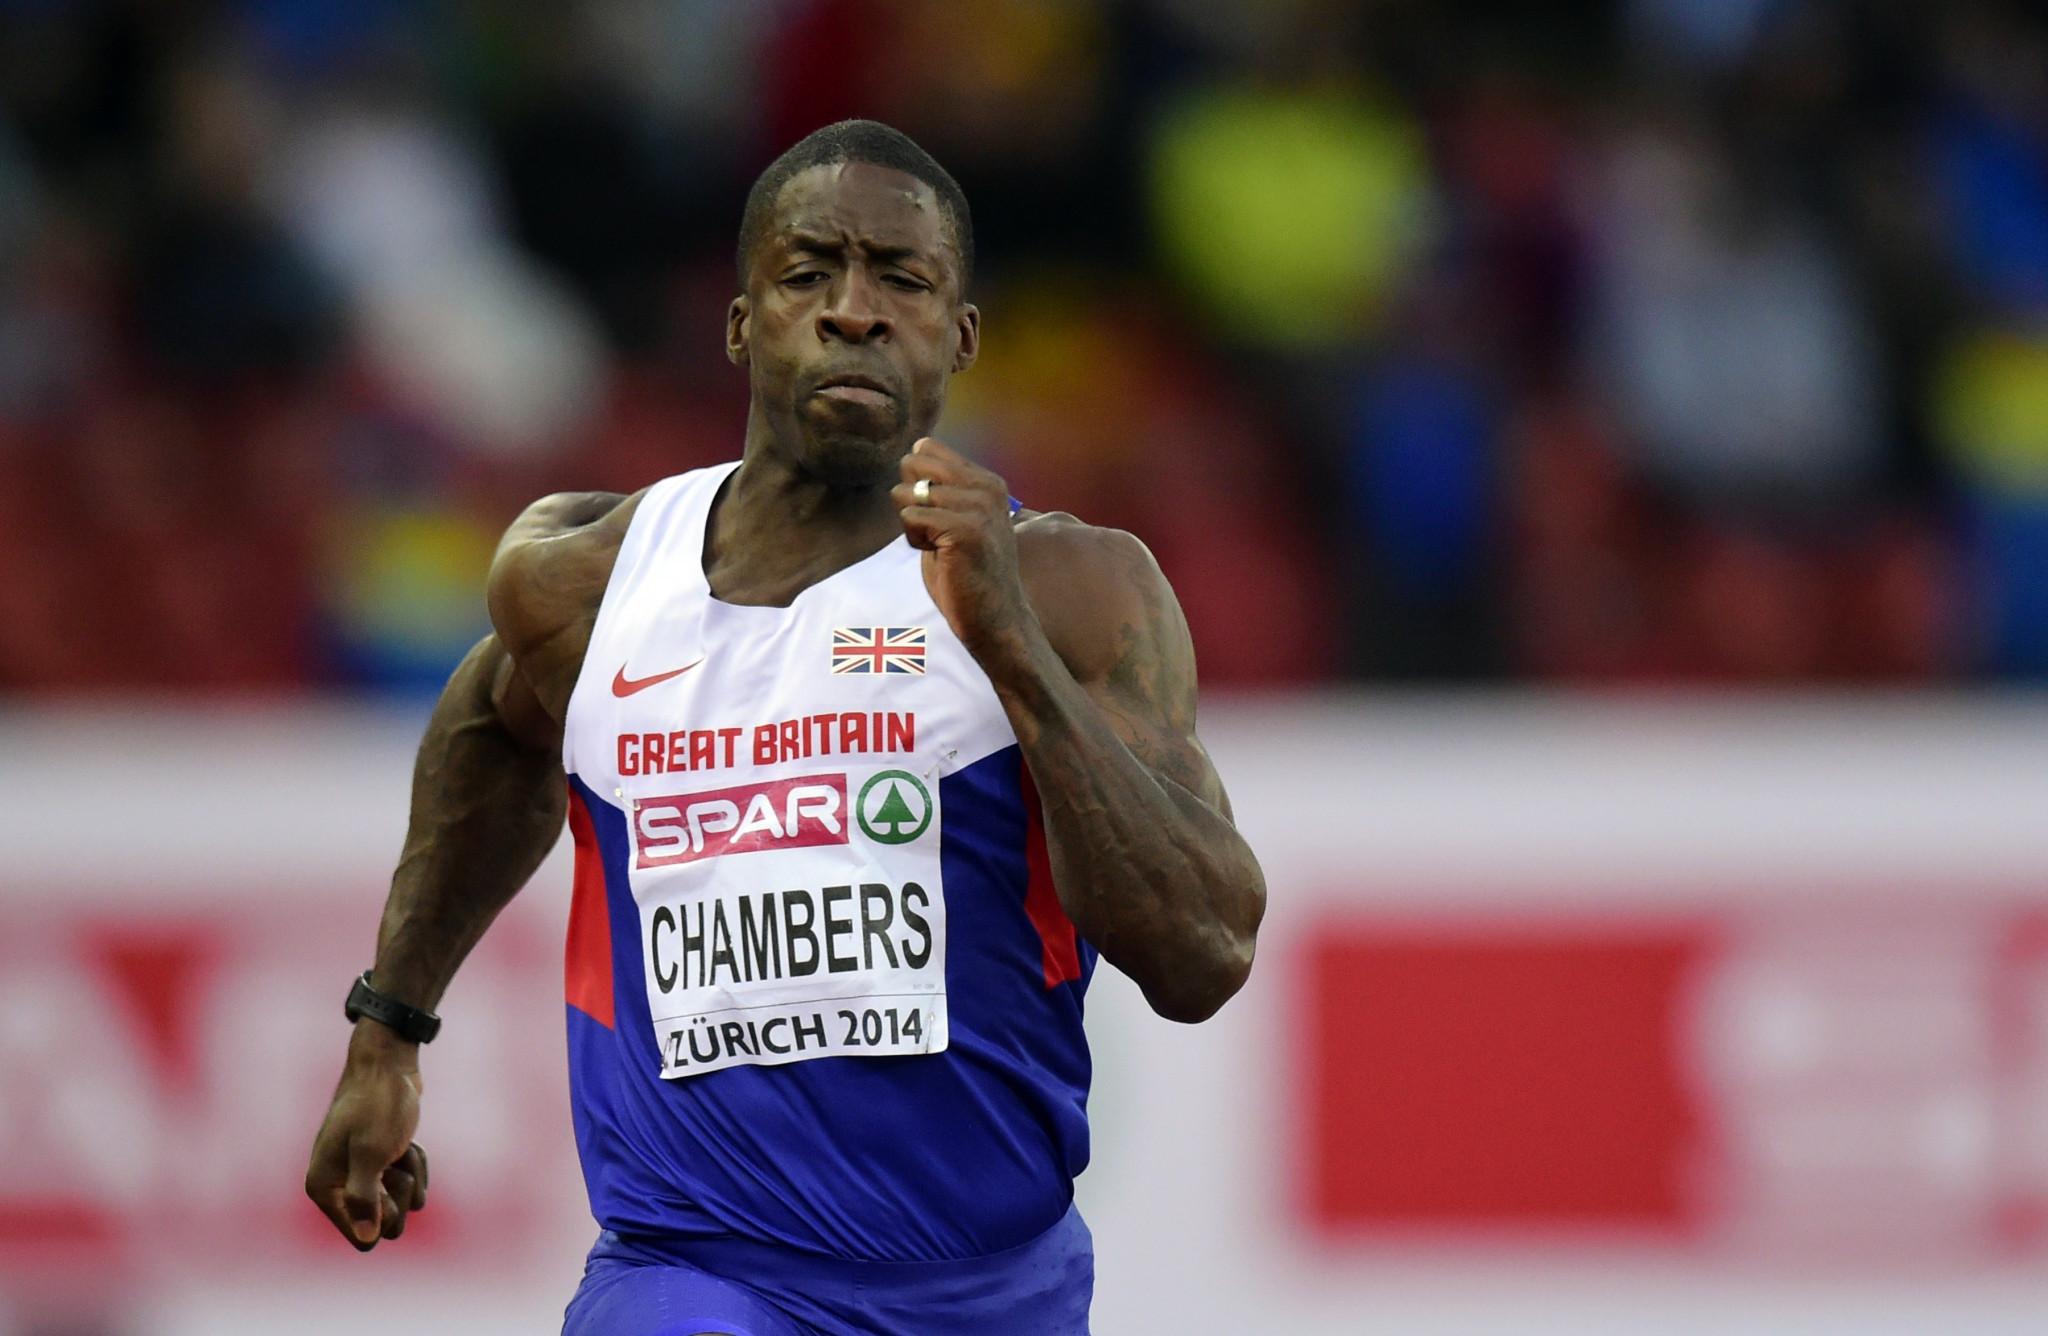 Britain's Dwain Chambers is among those to have divided public opinion regarding doping cases ©Getty Images